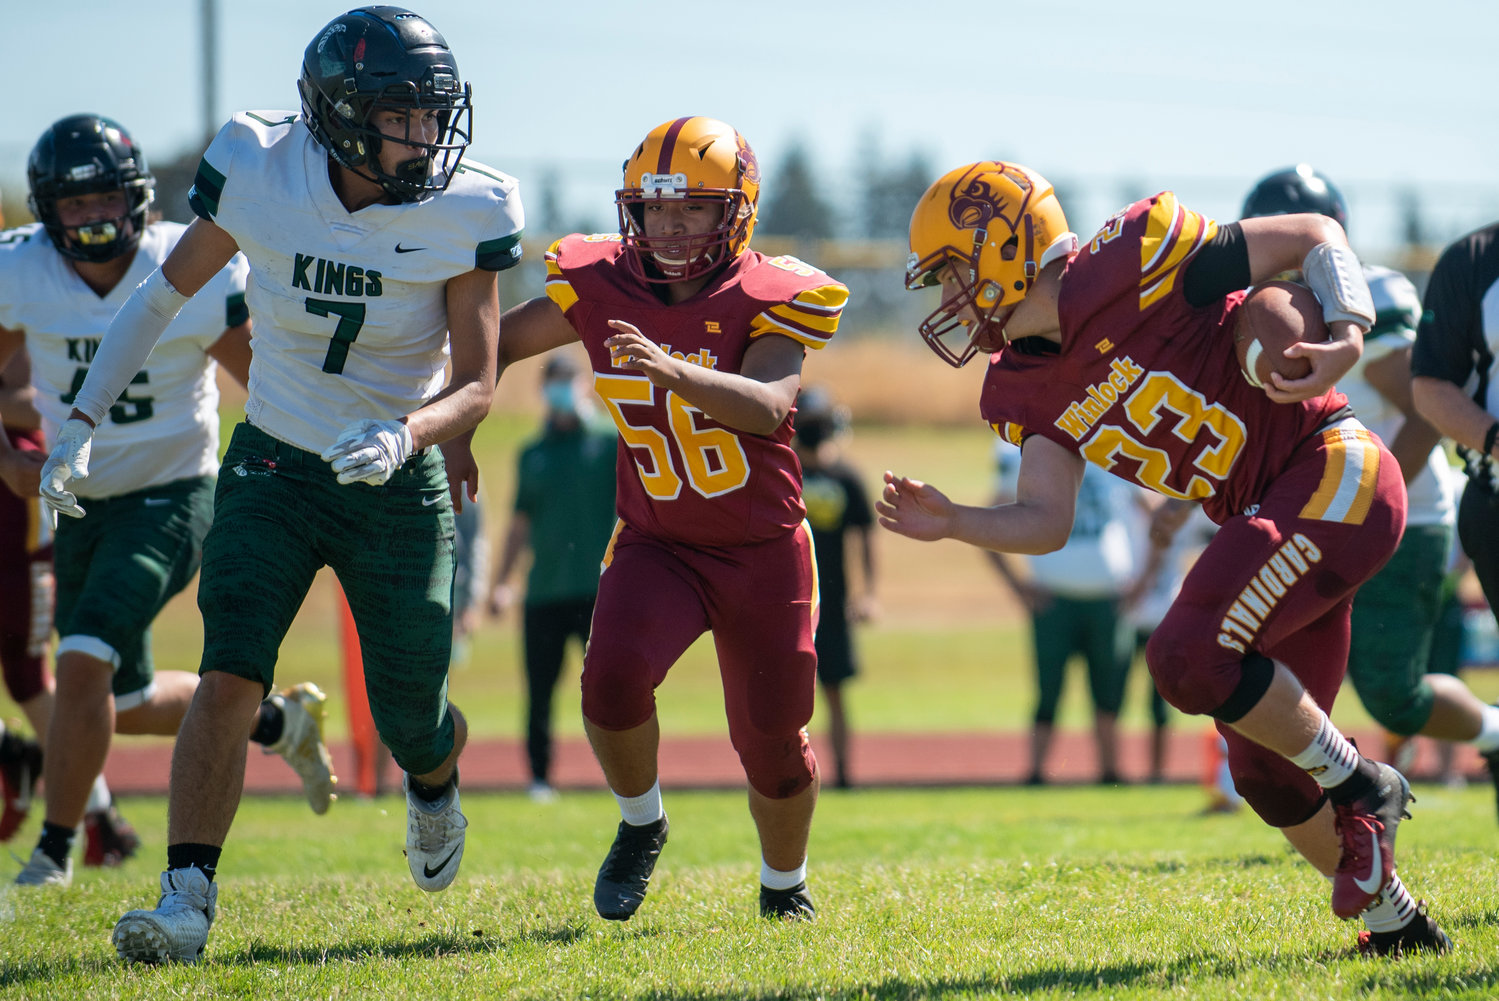 Winlock's Neal Patching (23) lowers his head as he runs toward a Muckleshoot Tribal player, with Xavier Barragan (56) in the background, on Saturday.